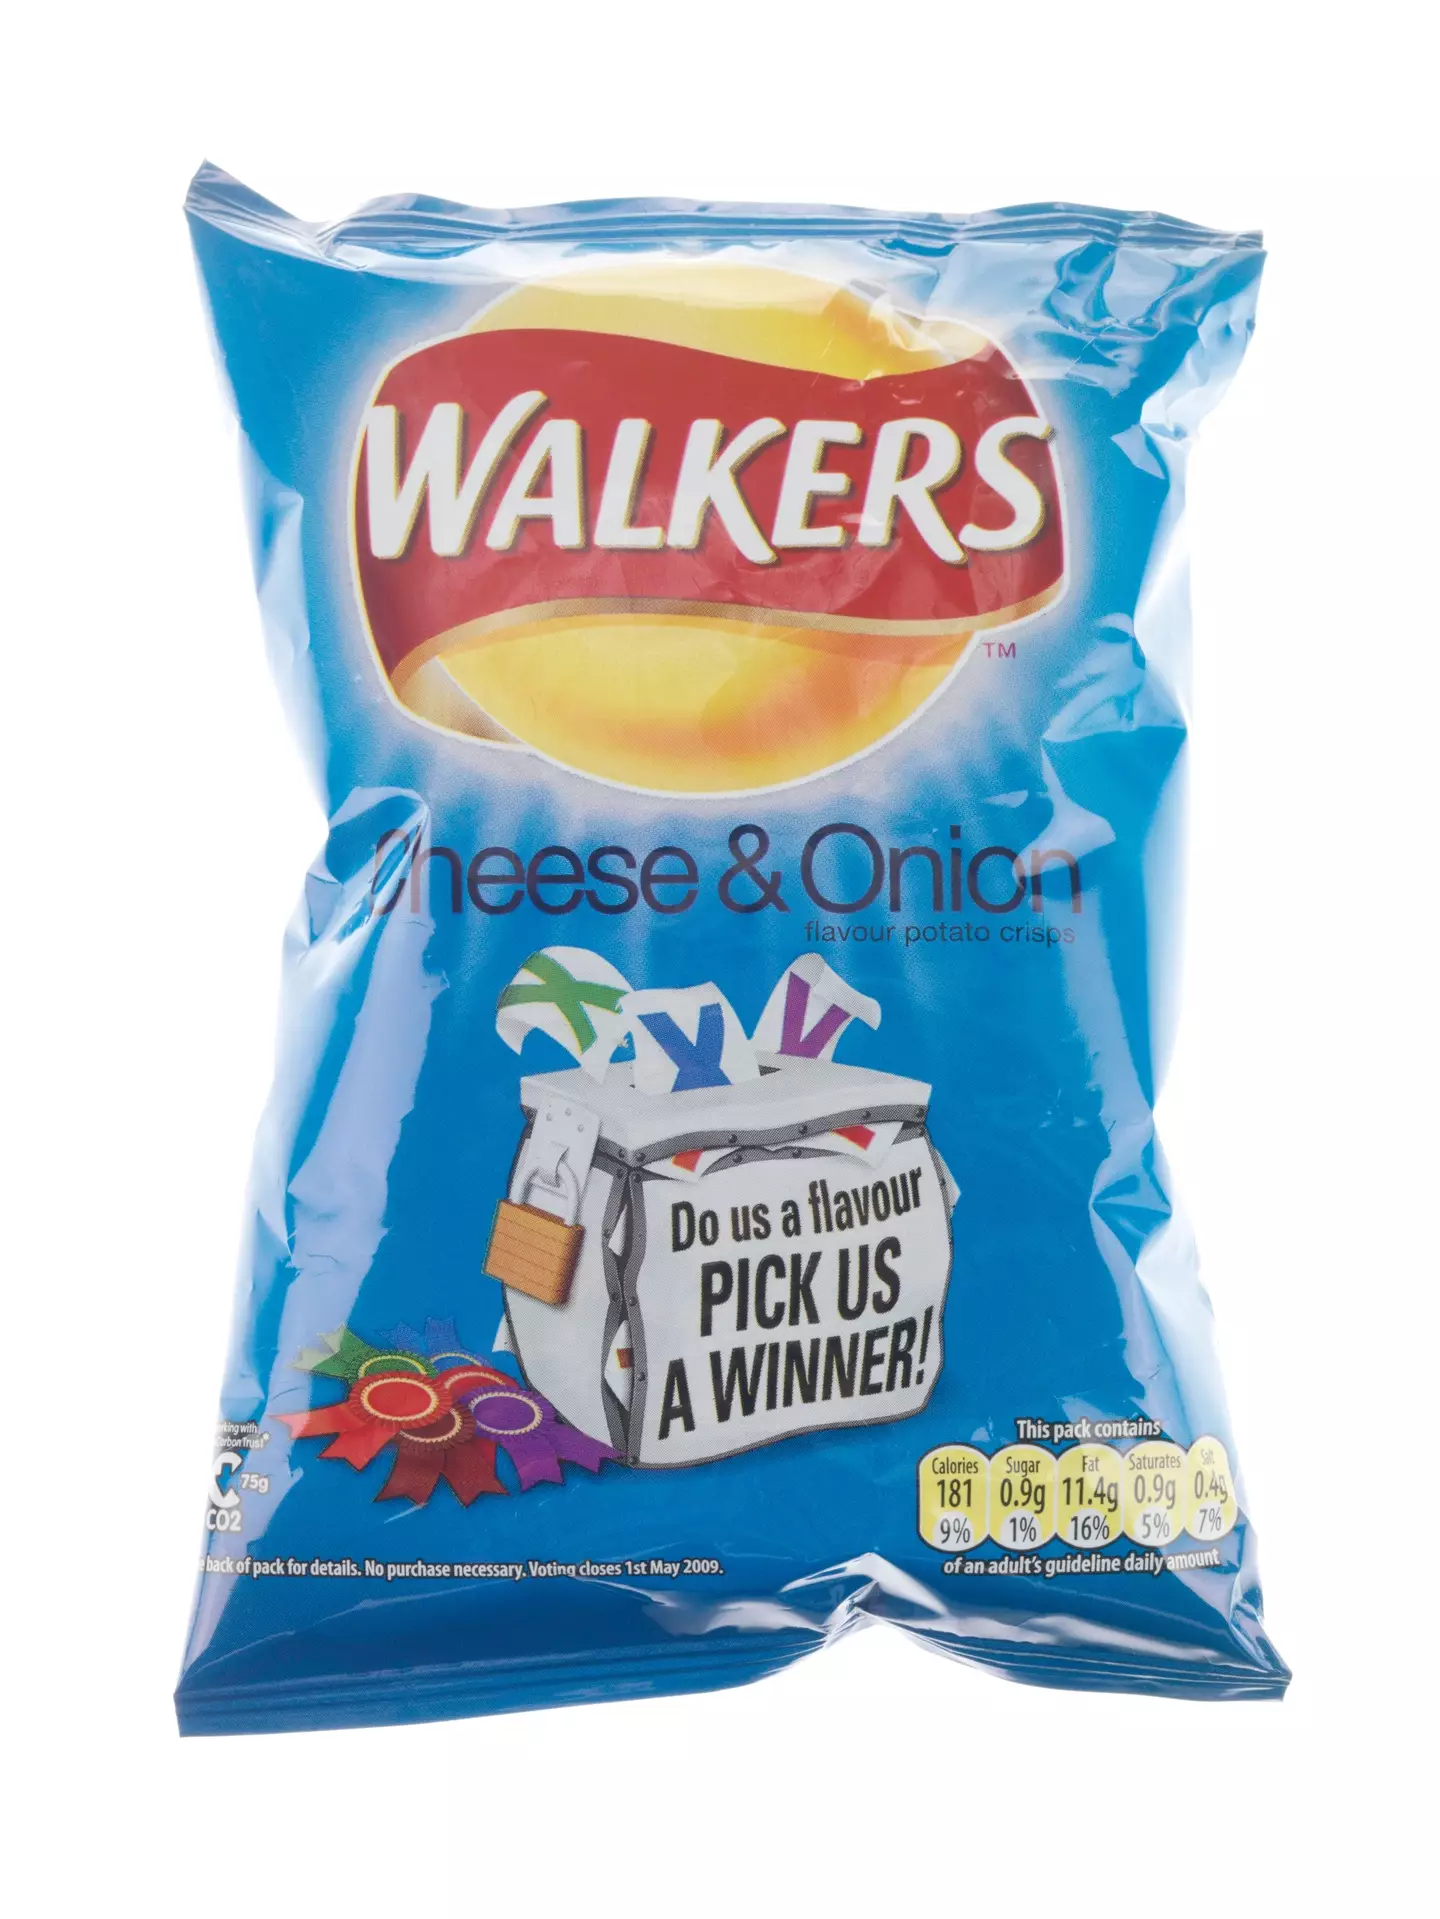 Walkers cheese and onion crisps have always come in blue bags.